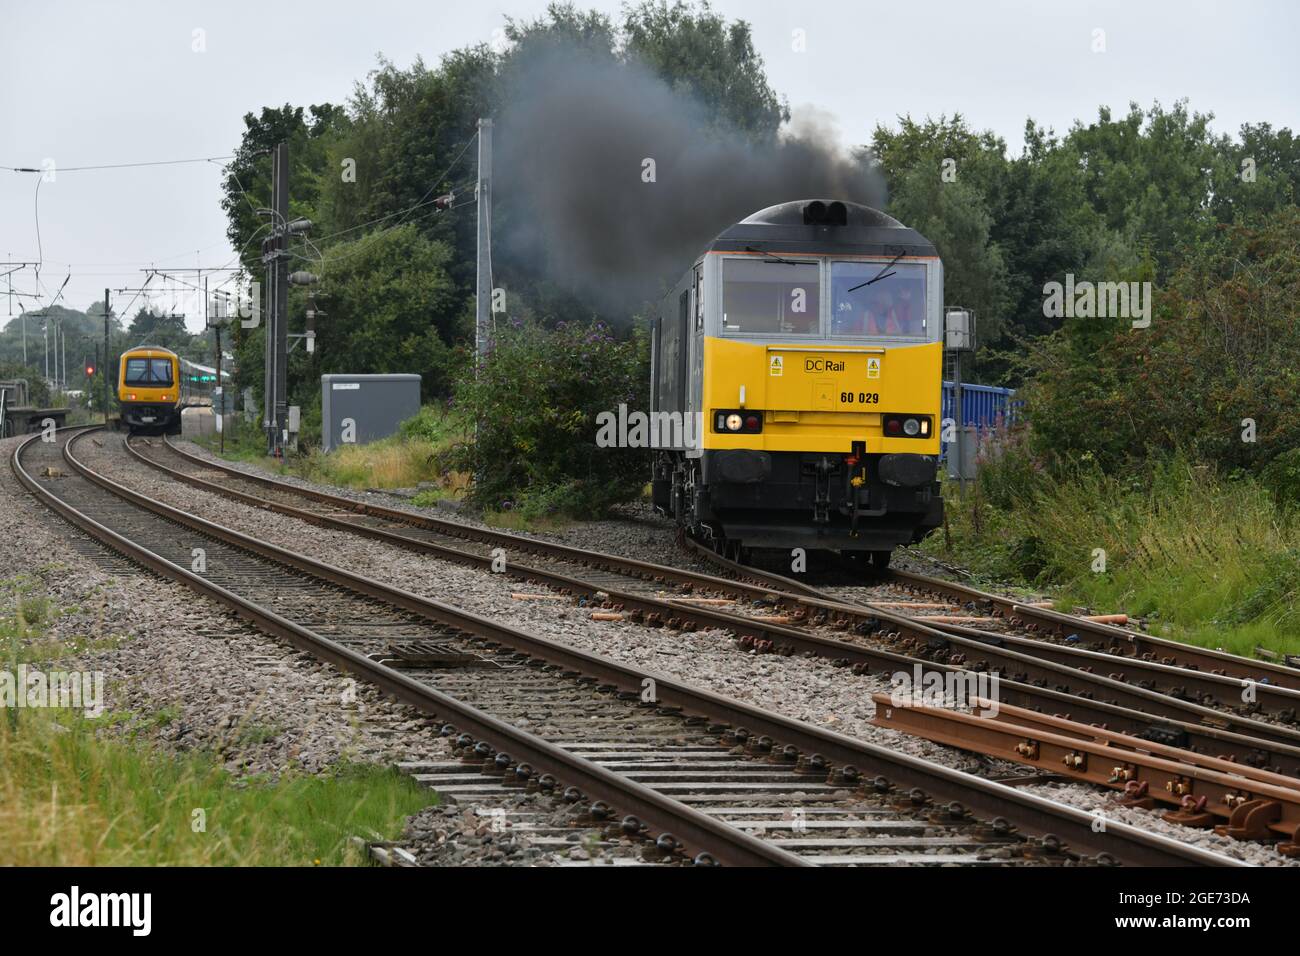 Clean & dirty forms of transport traction on show as Class 60 60029 Ben Nevis emits copious amount of exhaust fumes as it climbs up Lichfield chord Stock Photo